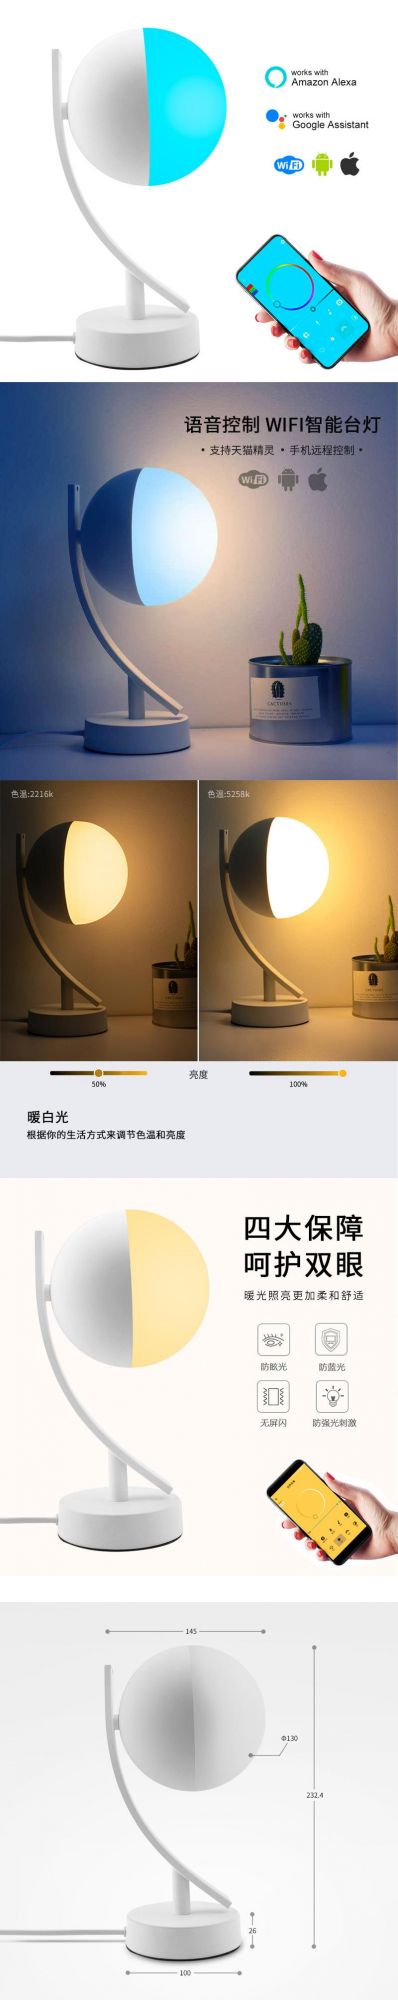 Hot Selling WiFi LED Table Lamp for Office/Bedroom